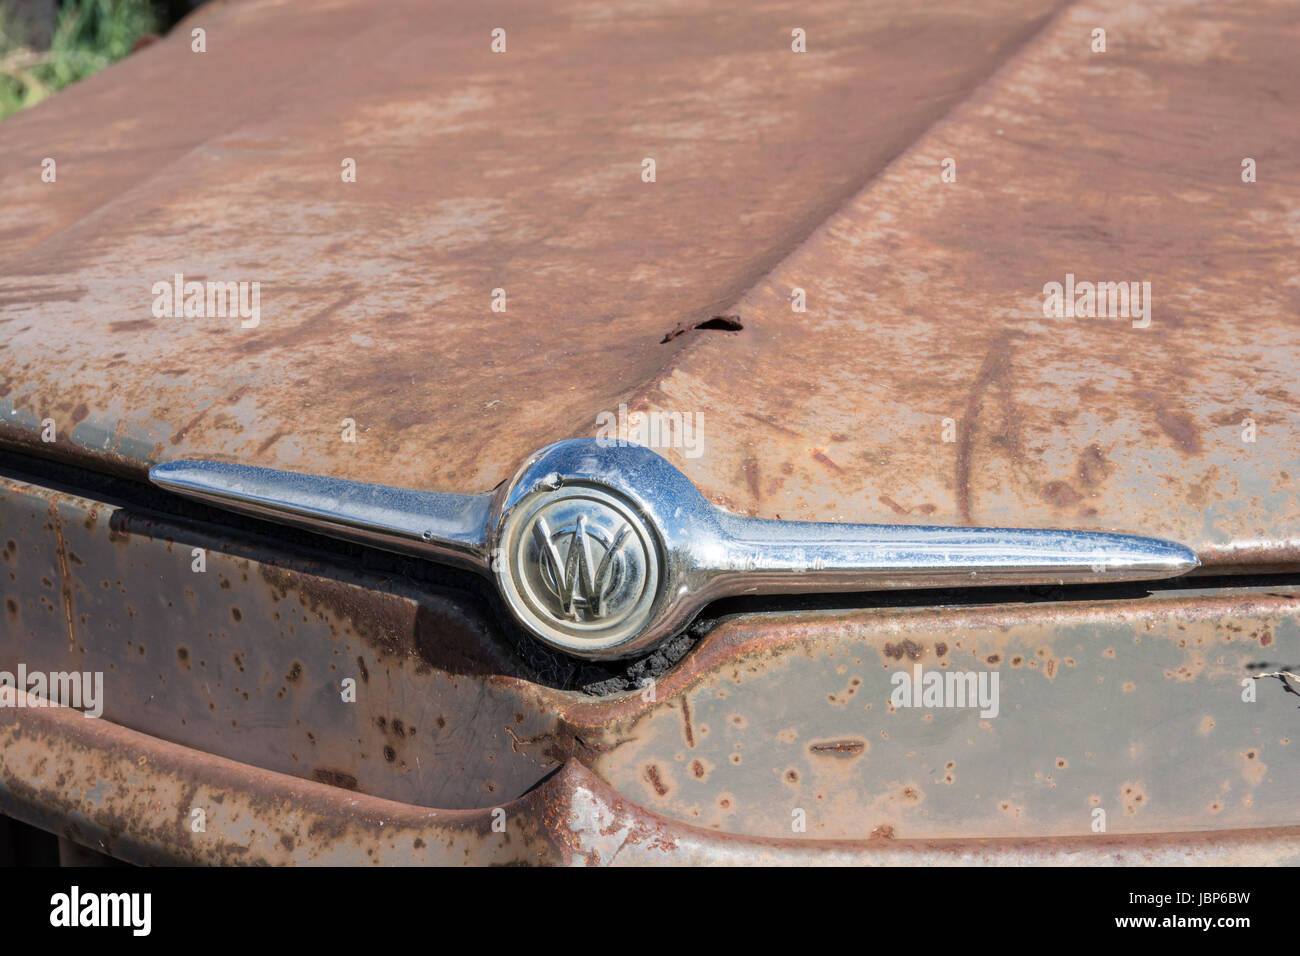 An Old Willys Jeep truck bonnet badge. Stock Photo